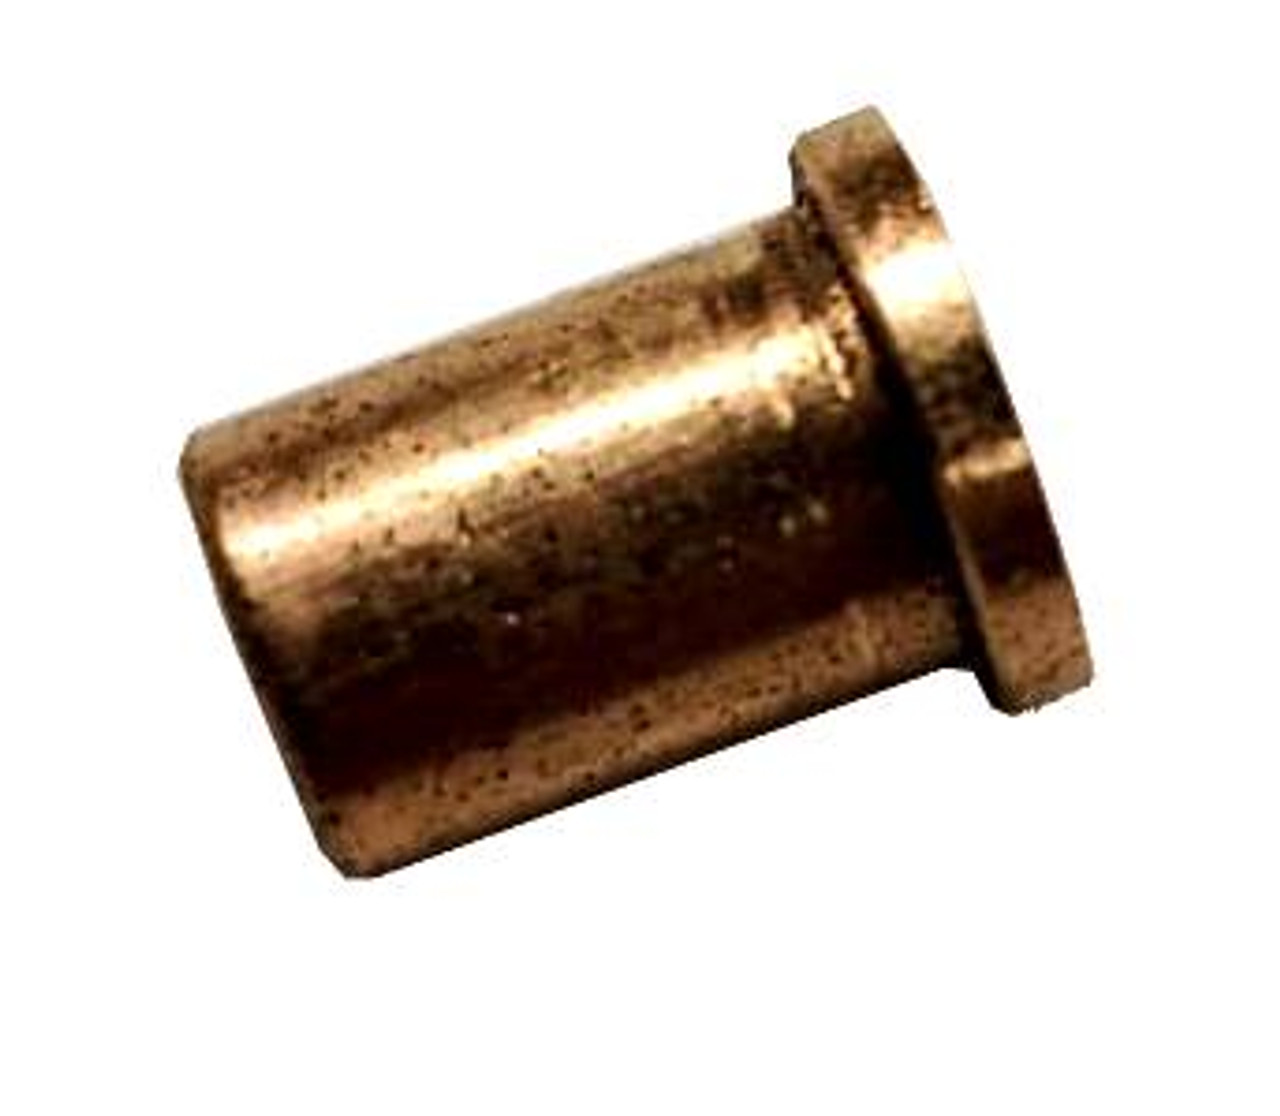 Self-Lubricated Brass Bushing for WK180-C with Machined 5/16 Upper Receiver Hole Mod